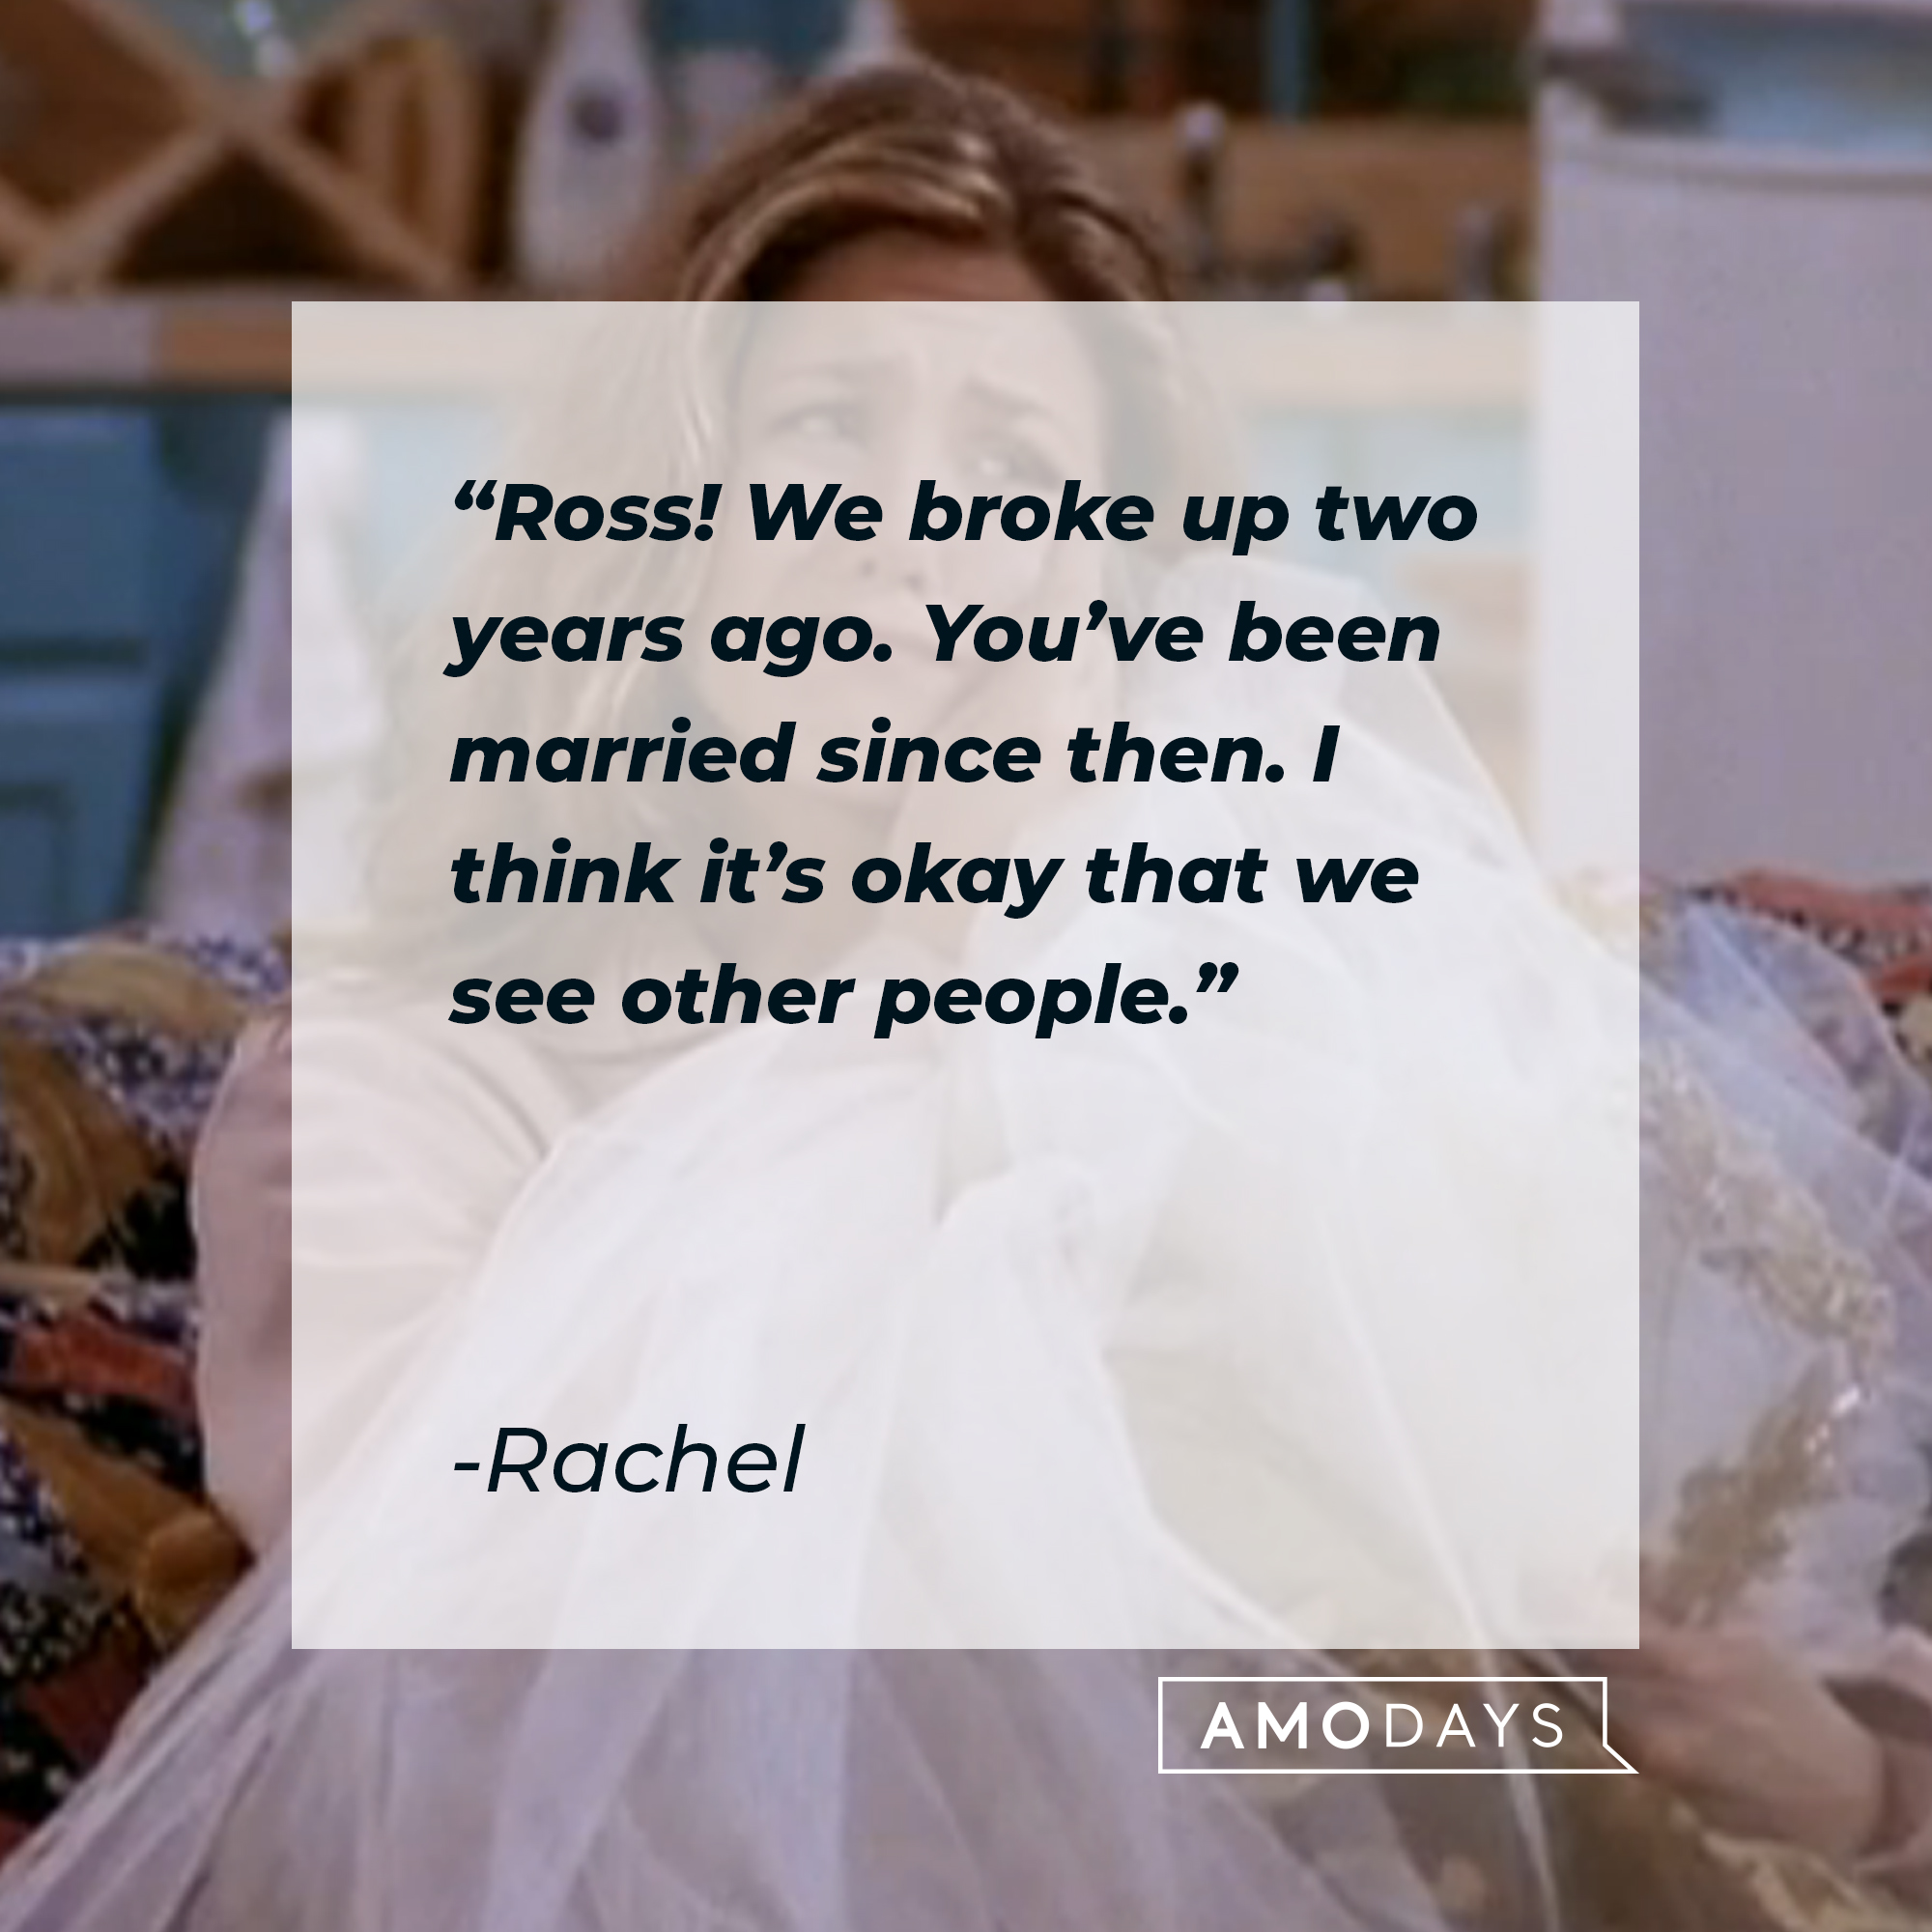 Rachel's quote: “Ross! We broke up two years ago. You’ve been married since then. I think it’s okay that we see other people.” | Source: facebook.com/friends.tv